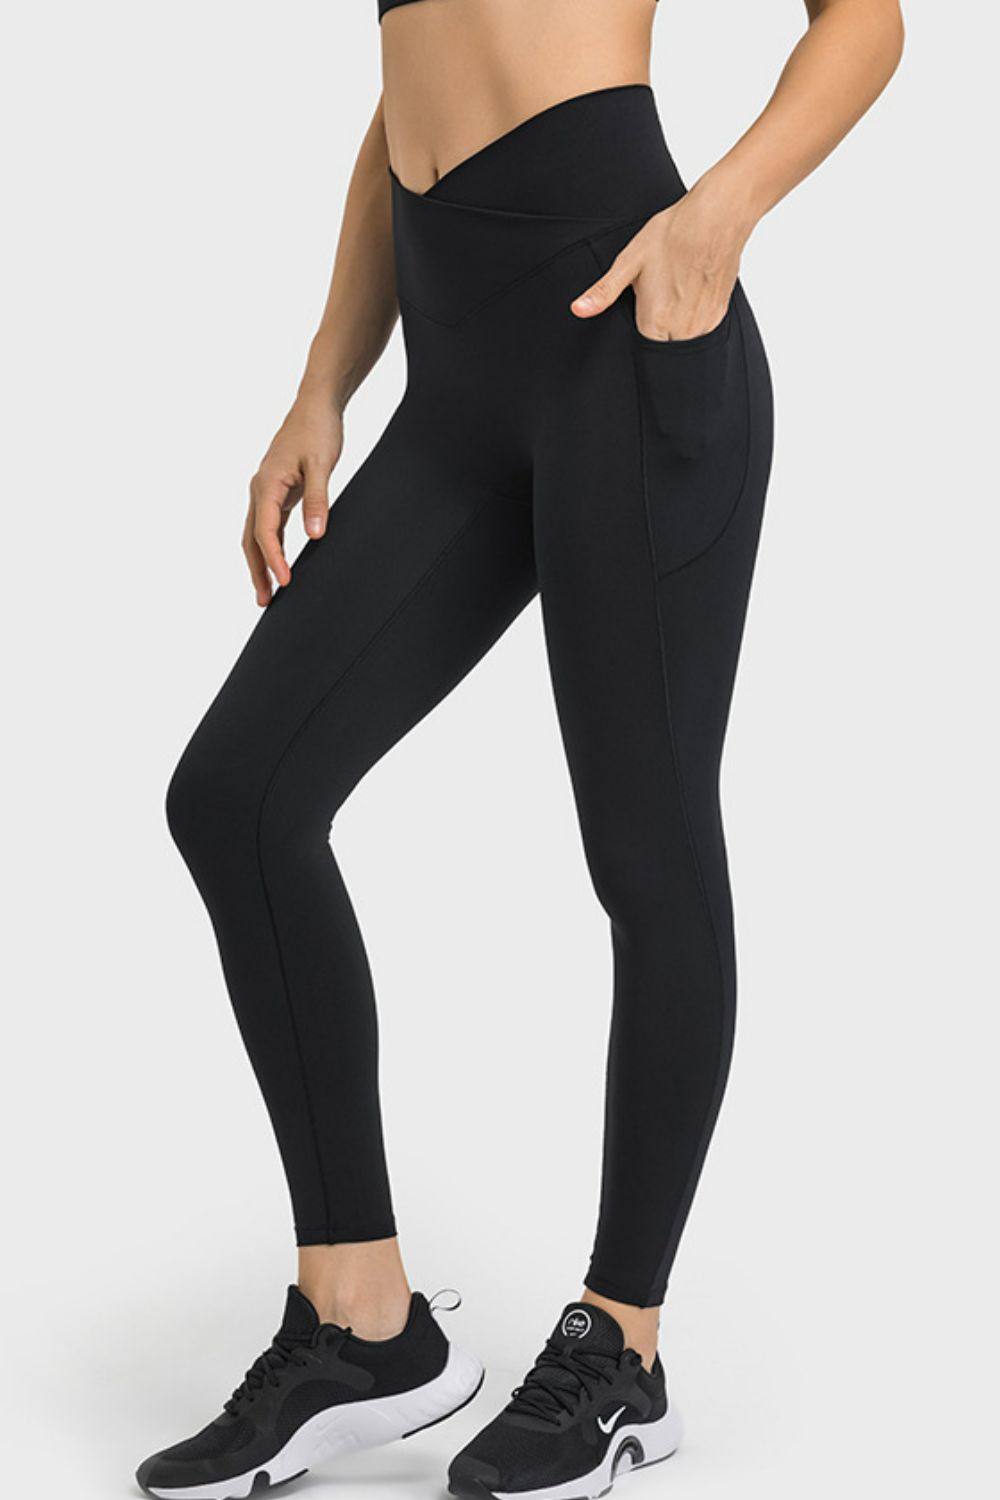 The Dupe Wide Seamless Band Leggings